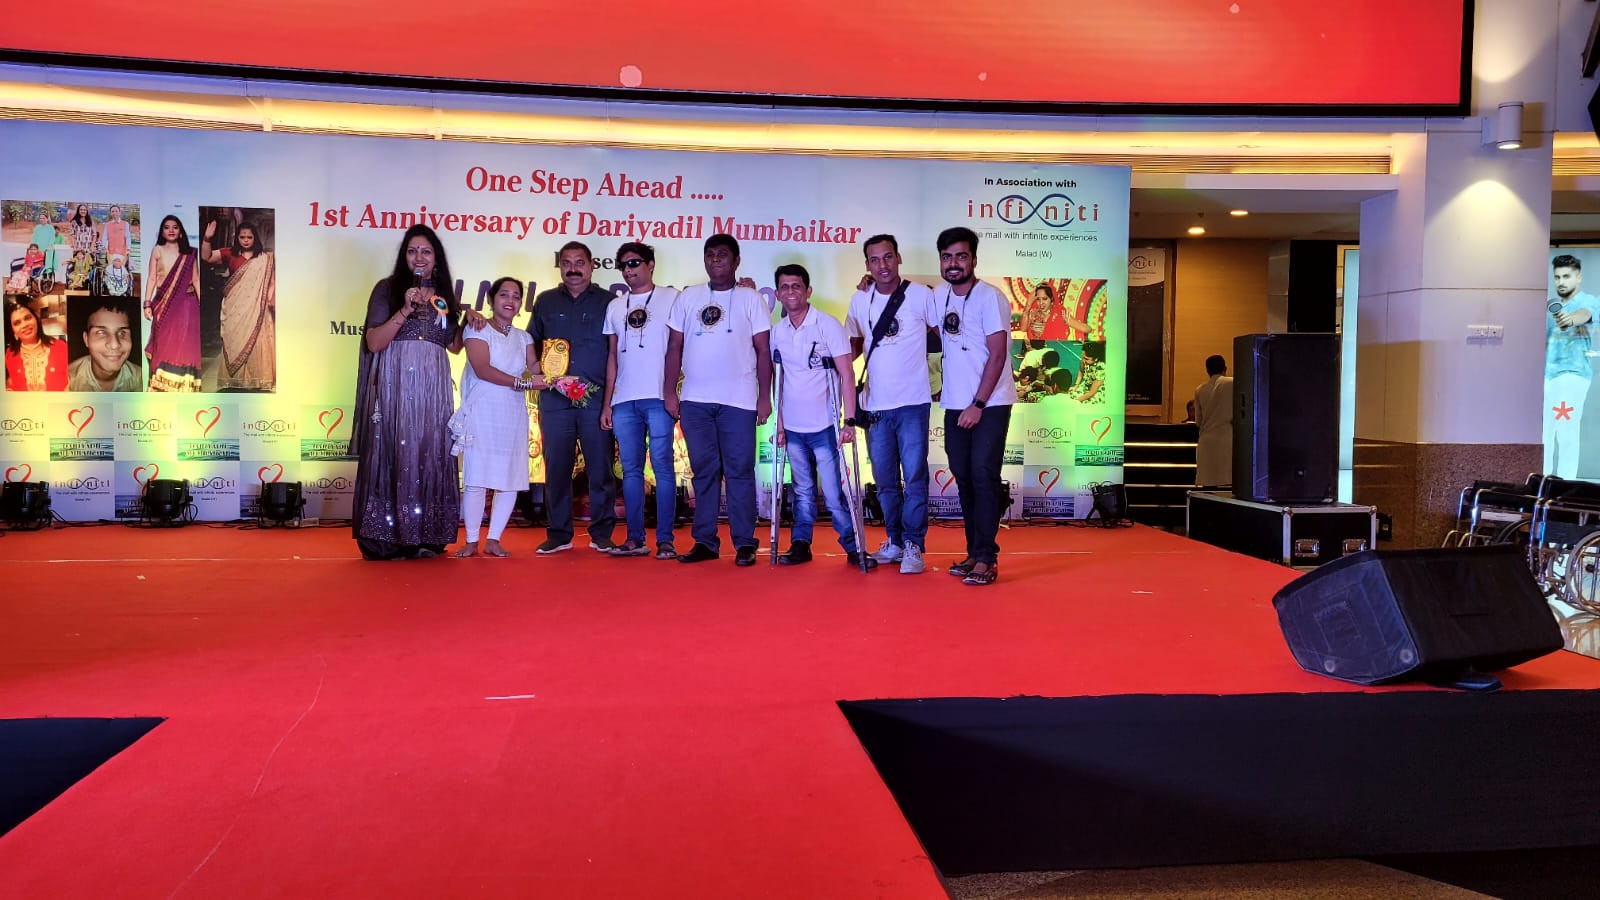 Stay Strong team performance at Infinity Mall, Mumbai